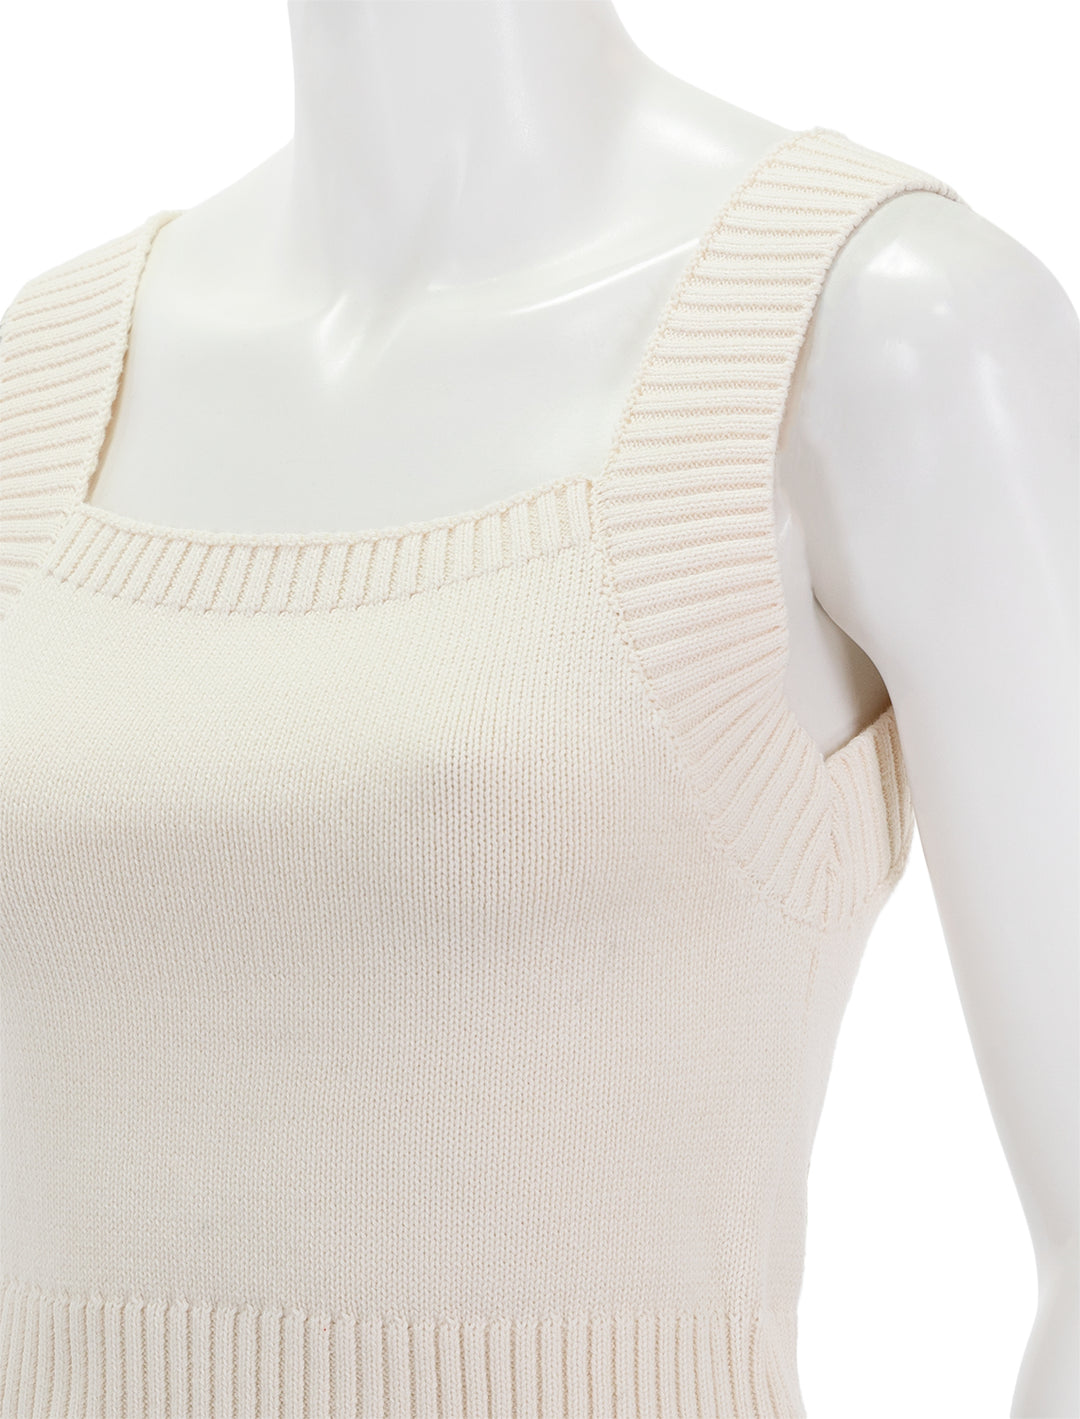 Close-up view of Lilla P.'s sweater tank in white.